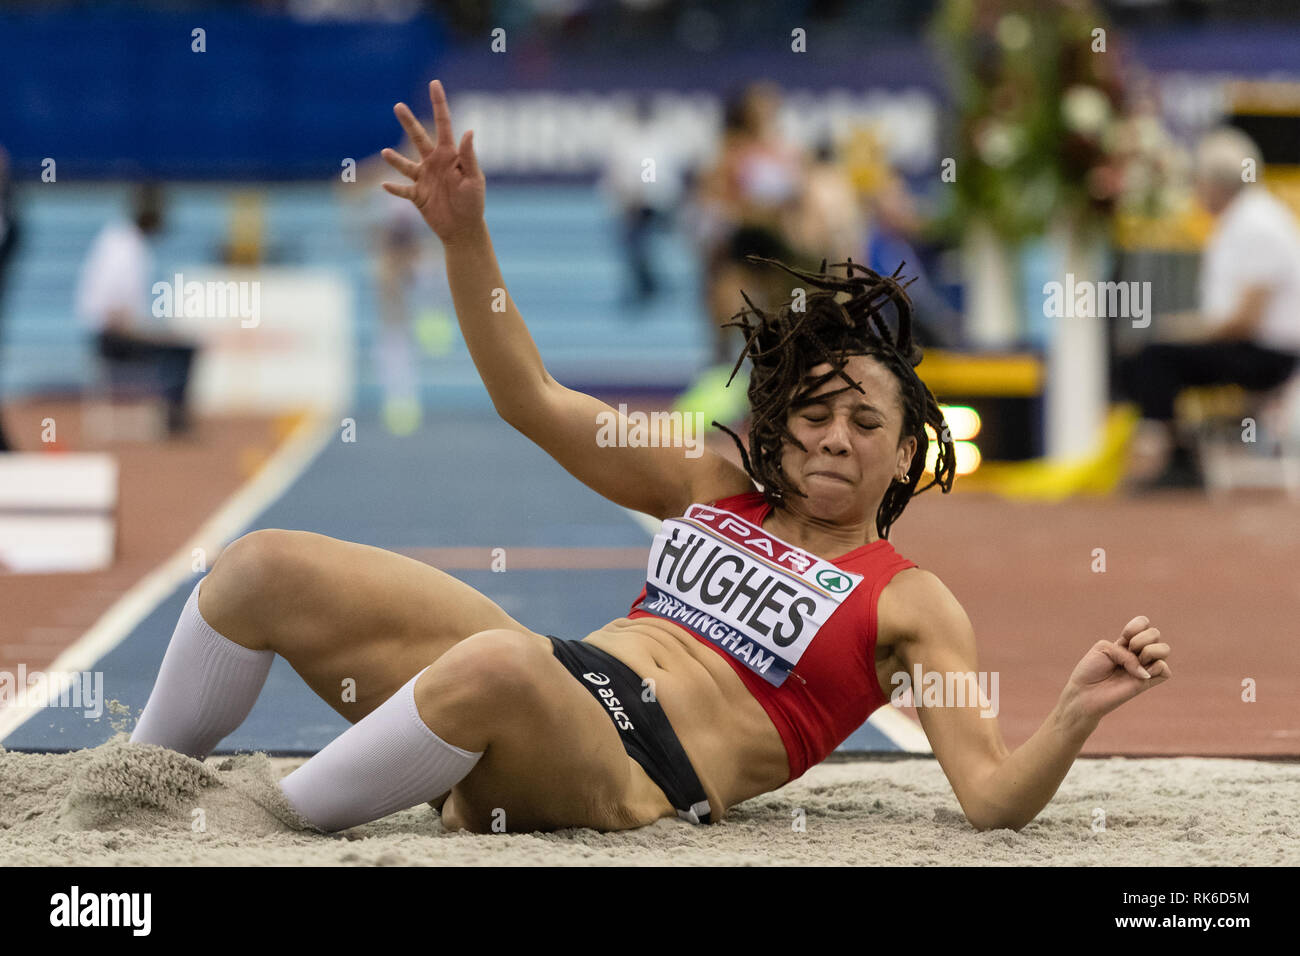 https://c8.alamy.com/comp/RK6D5M/birmingham-uk-9th-feb-2019-mayi-hughes-in-women-triple-jump-finals-during-spar-british-athletics-indoor-championships-2019-at-arena-birmingham-on-saturday-09-february-2019-birmingham-england-editorial-use-only-license-required-for-commercial-use-no-use-in-betting-games-or-a-single-clubleagueplayer-publications-credit-taka-g-wualamy-news-credit-taka-wualamy-live-news-RK6D5M.jpg